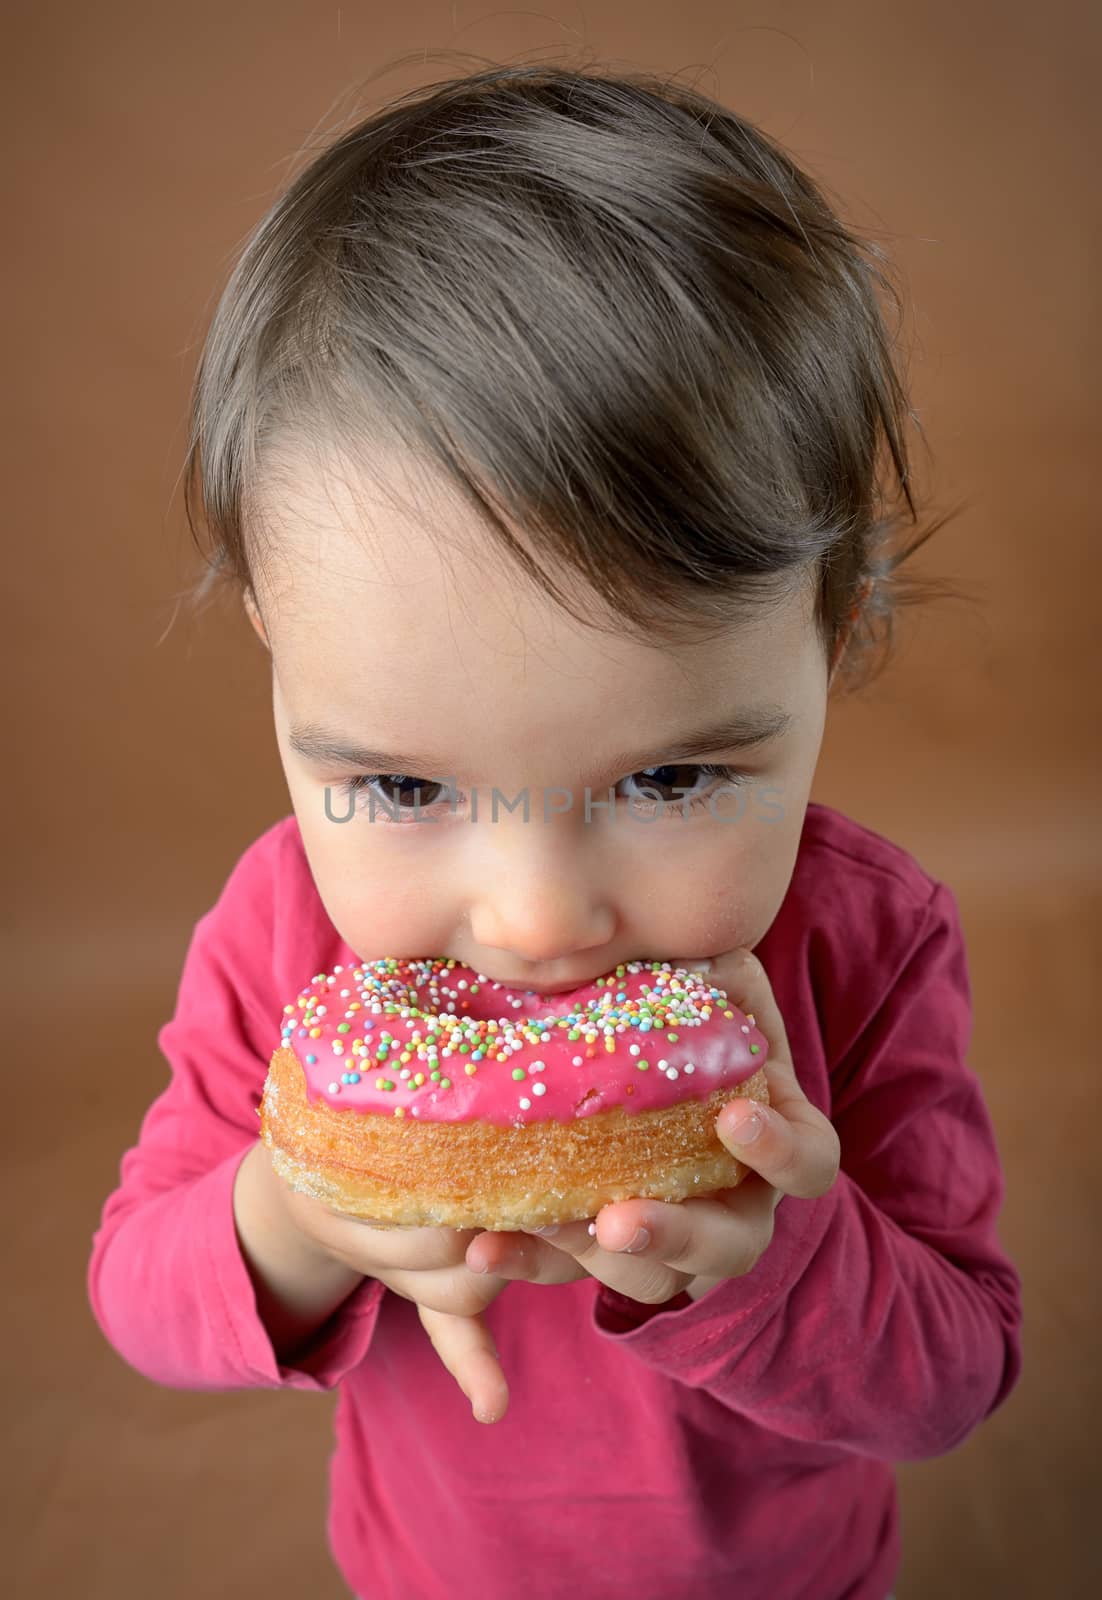 Little girl eating donuts by mady70